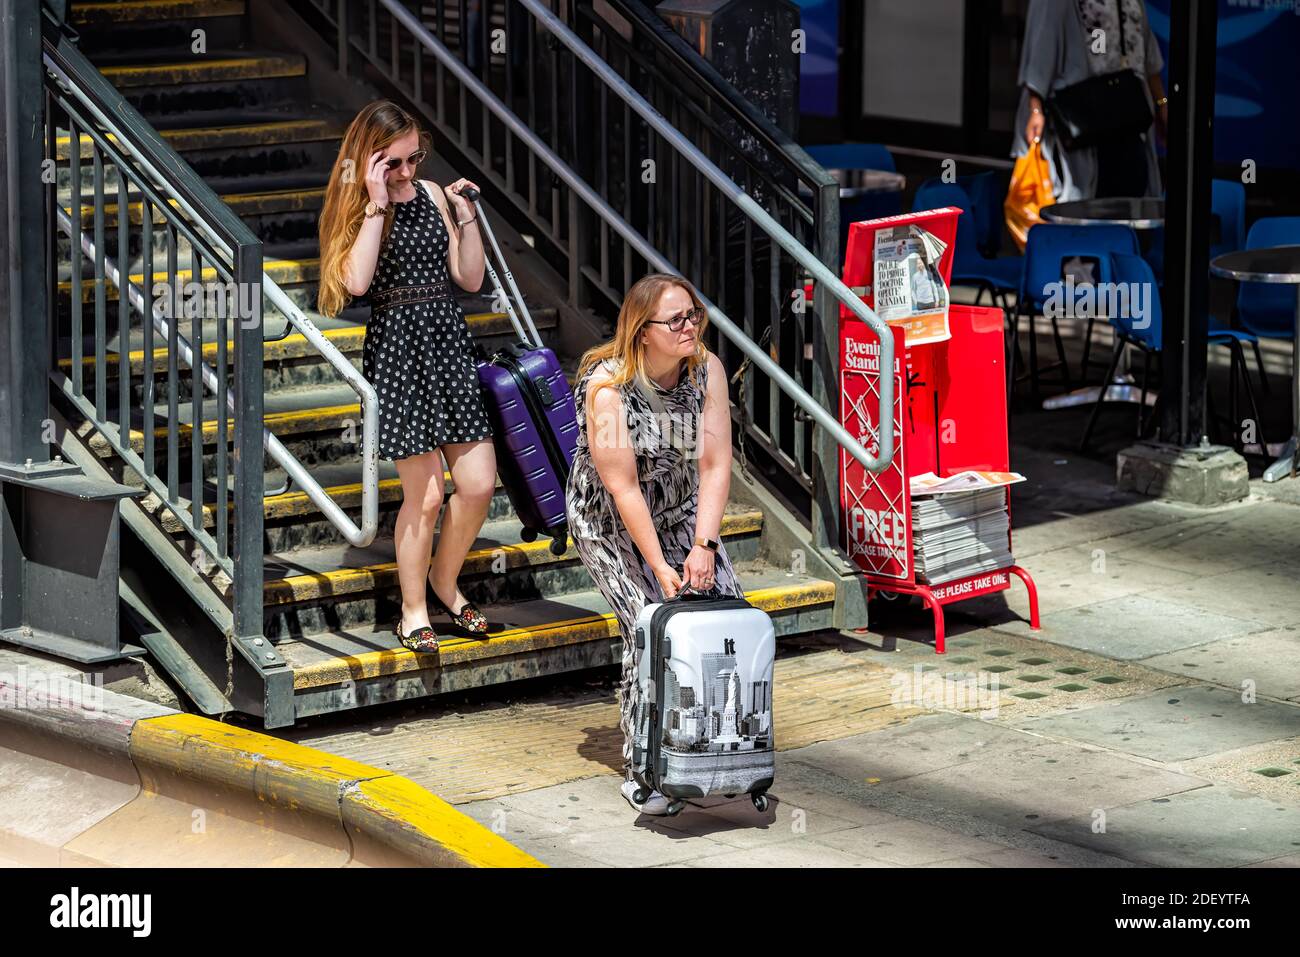 London, UK - June 22, 2018: People candid outside with luggage baggage ...